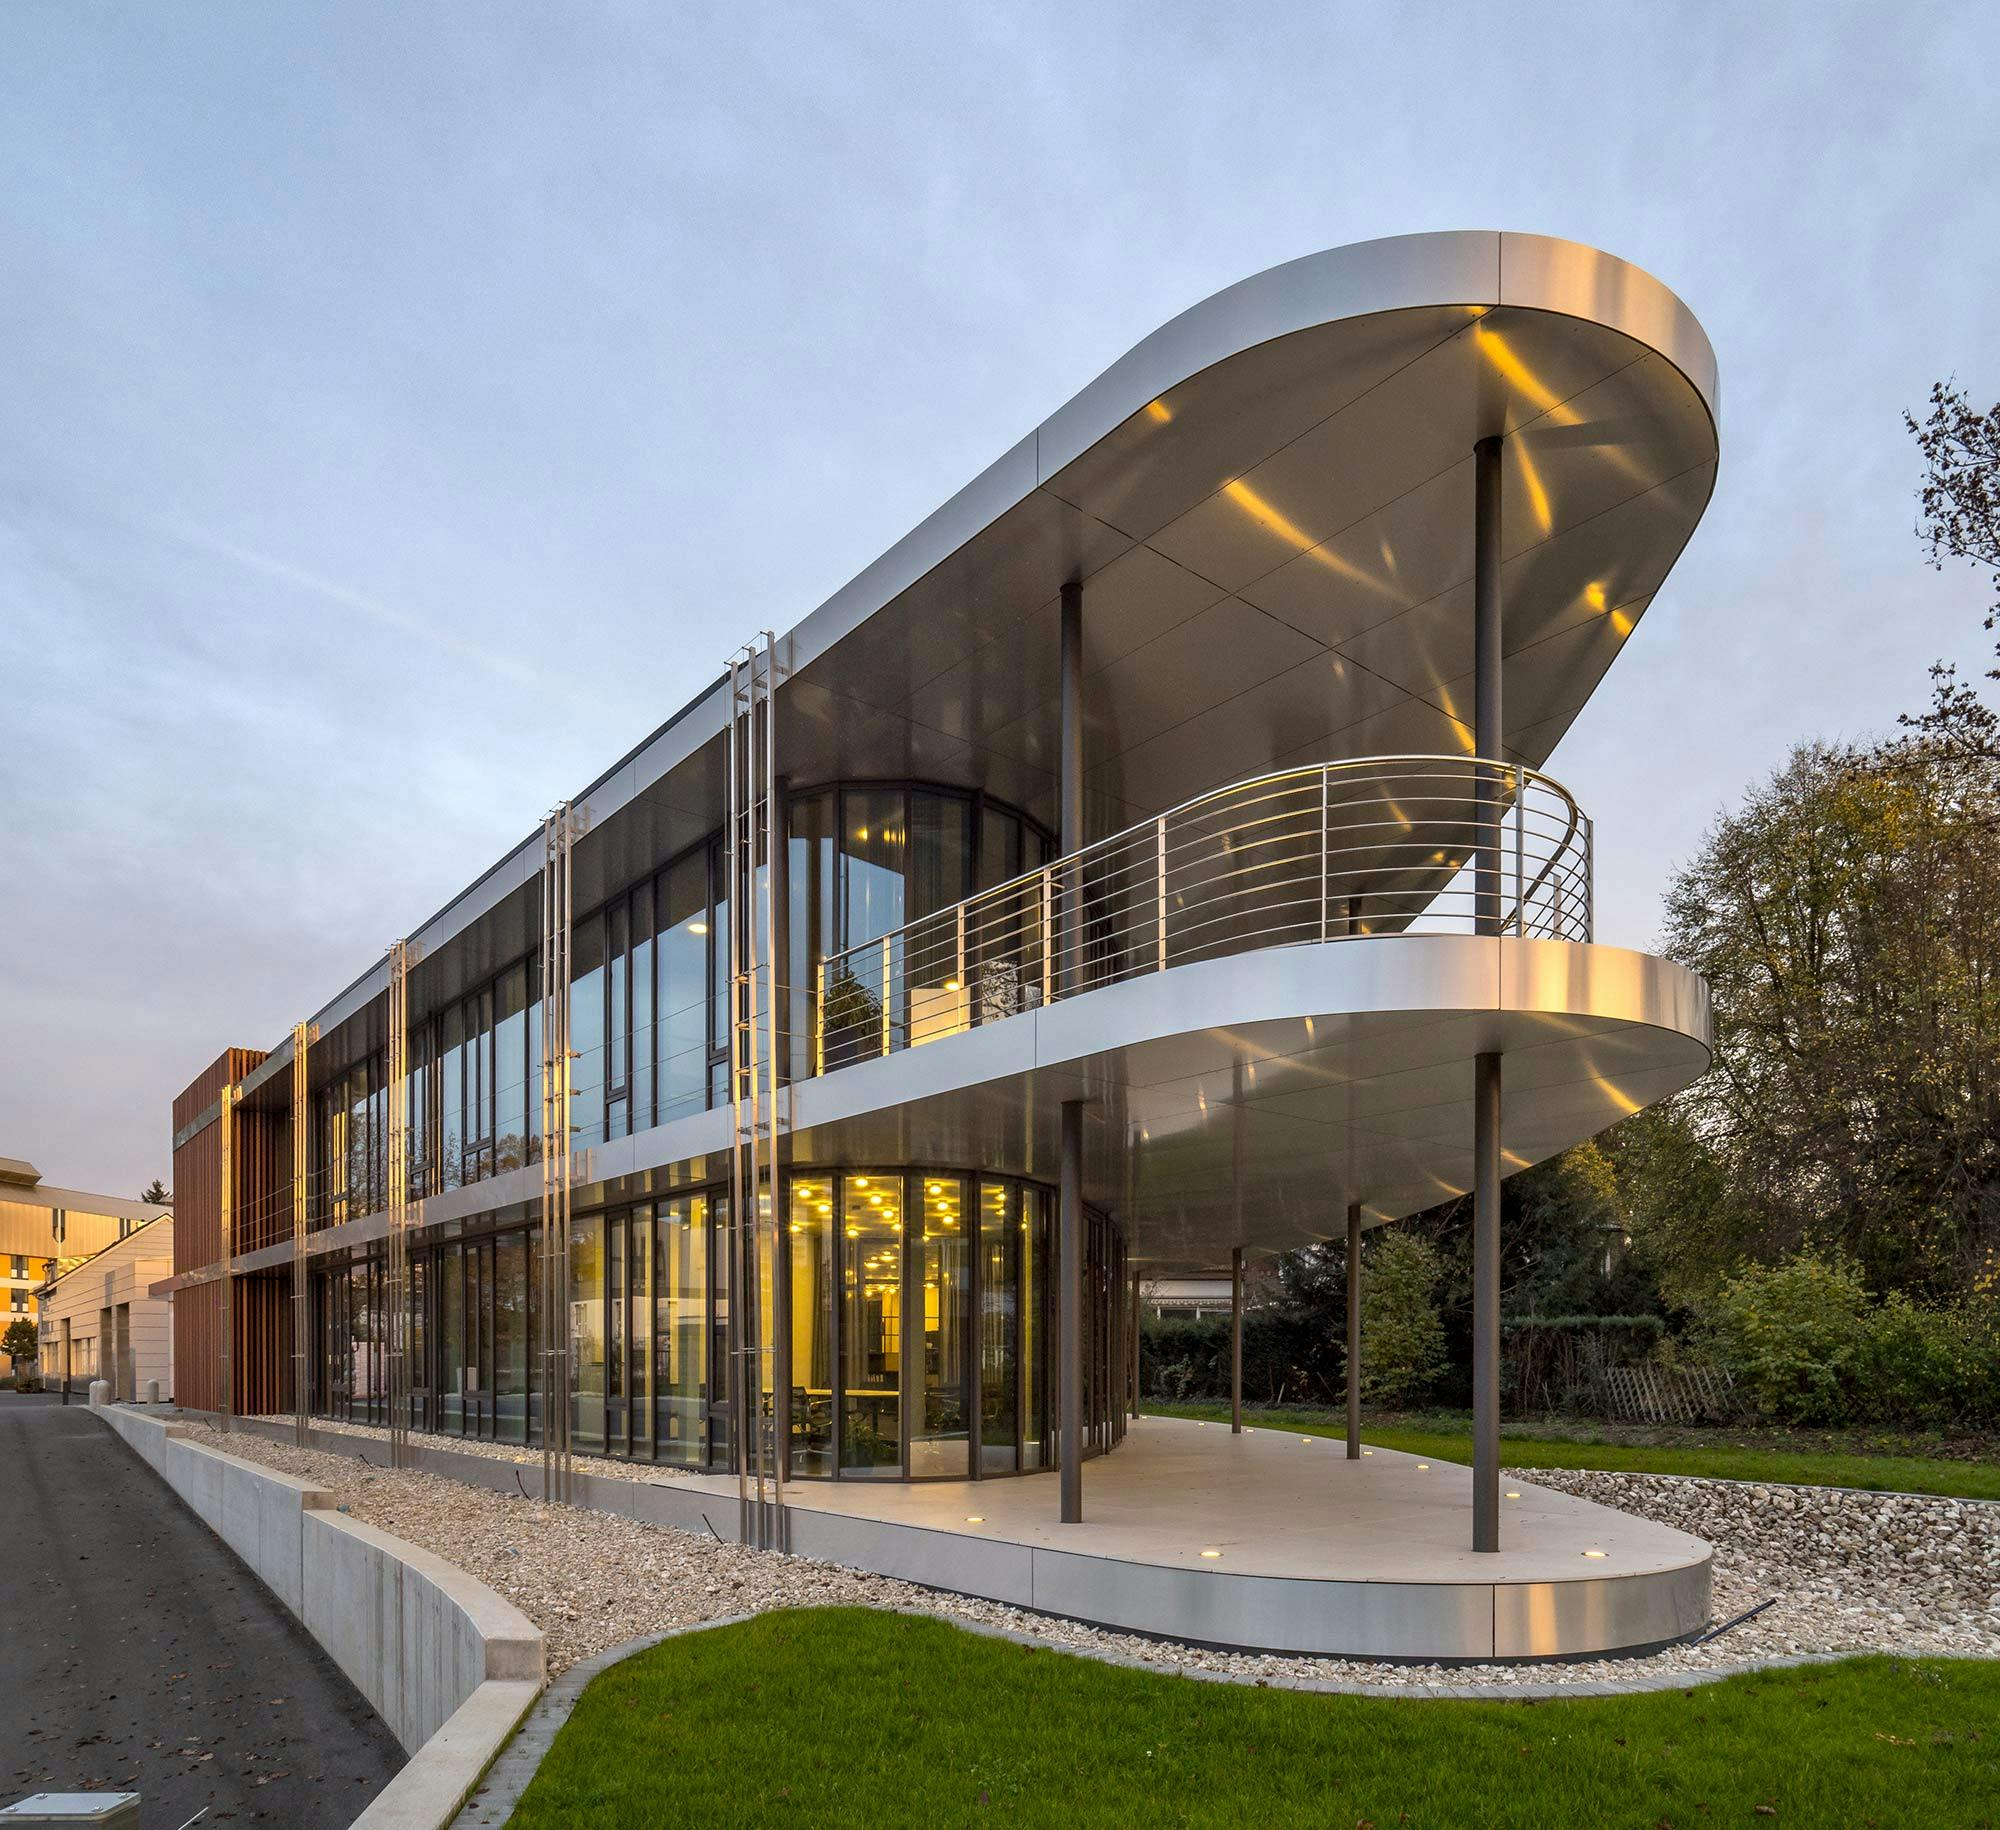 Numéro d'image 34 de la section actuelle de The connection between the interior and exterior of the Yuvalim Group’s corporate campus was made possible thanks to DKTN de Cosentino France